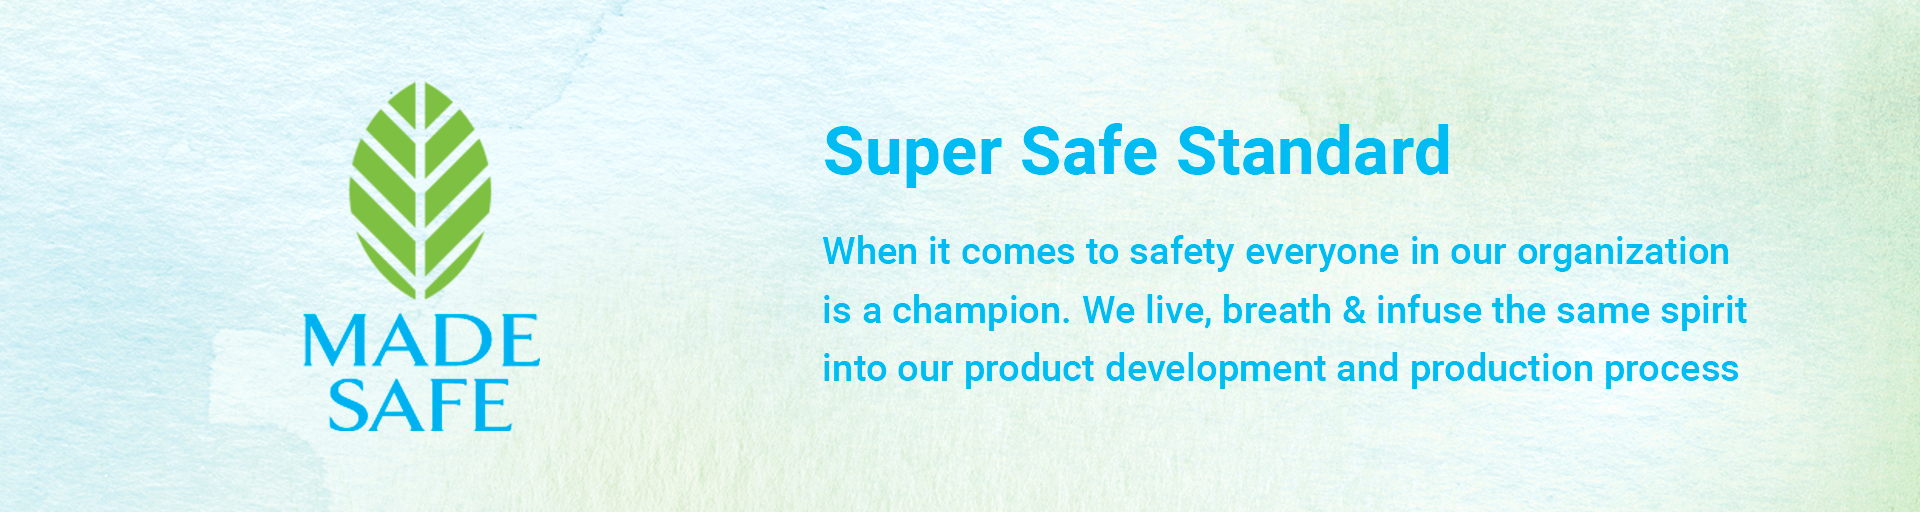 We are Safe main banner